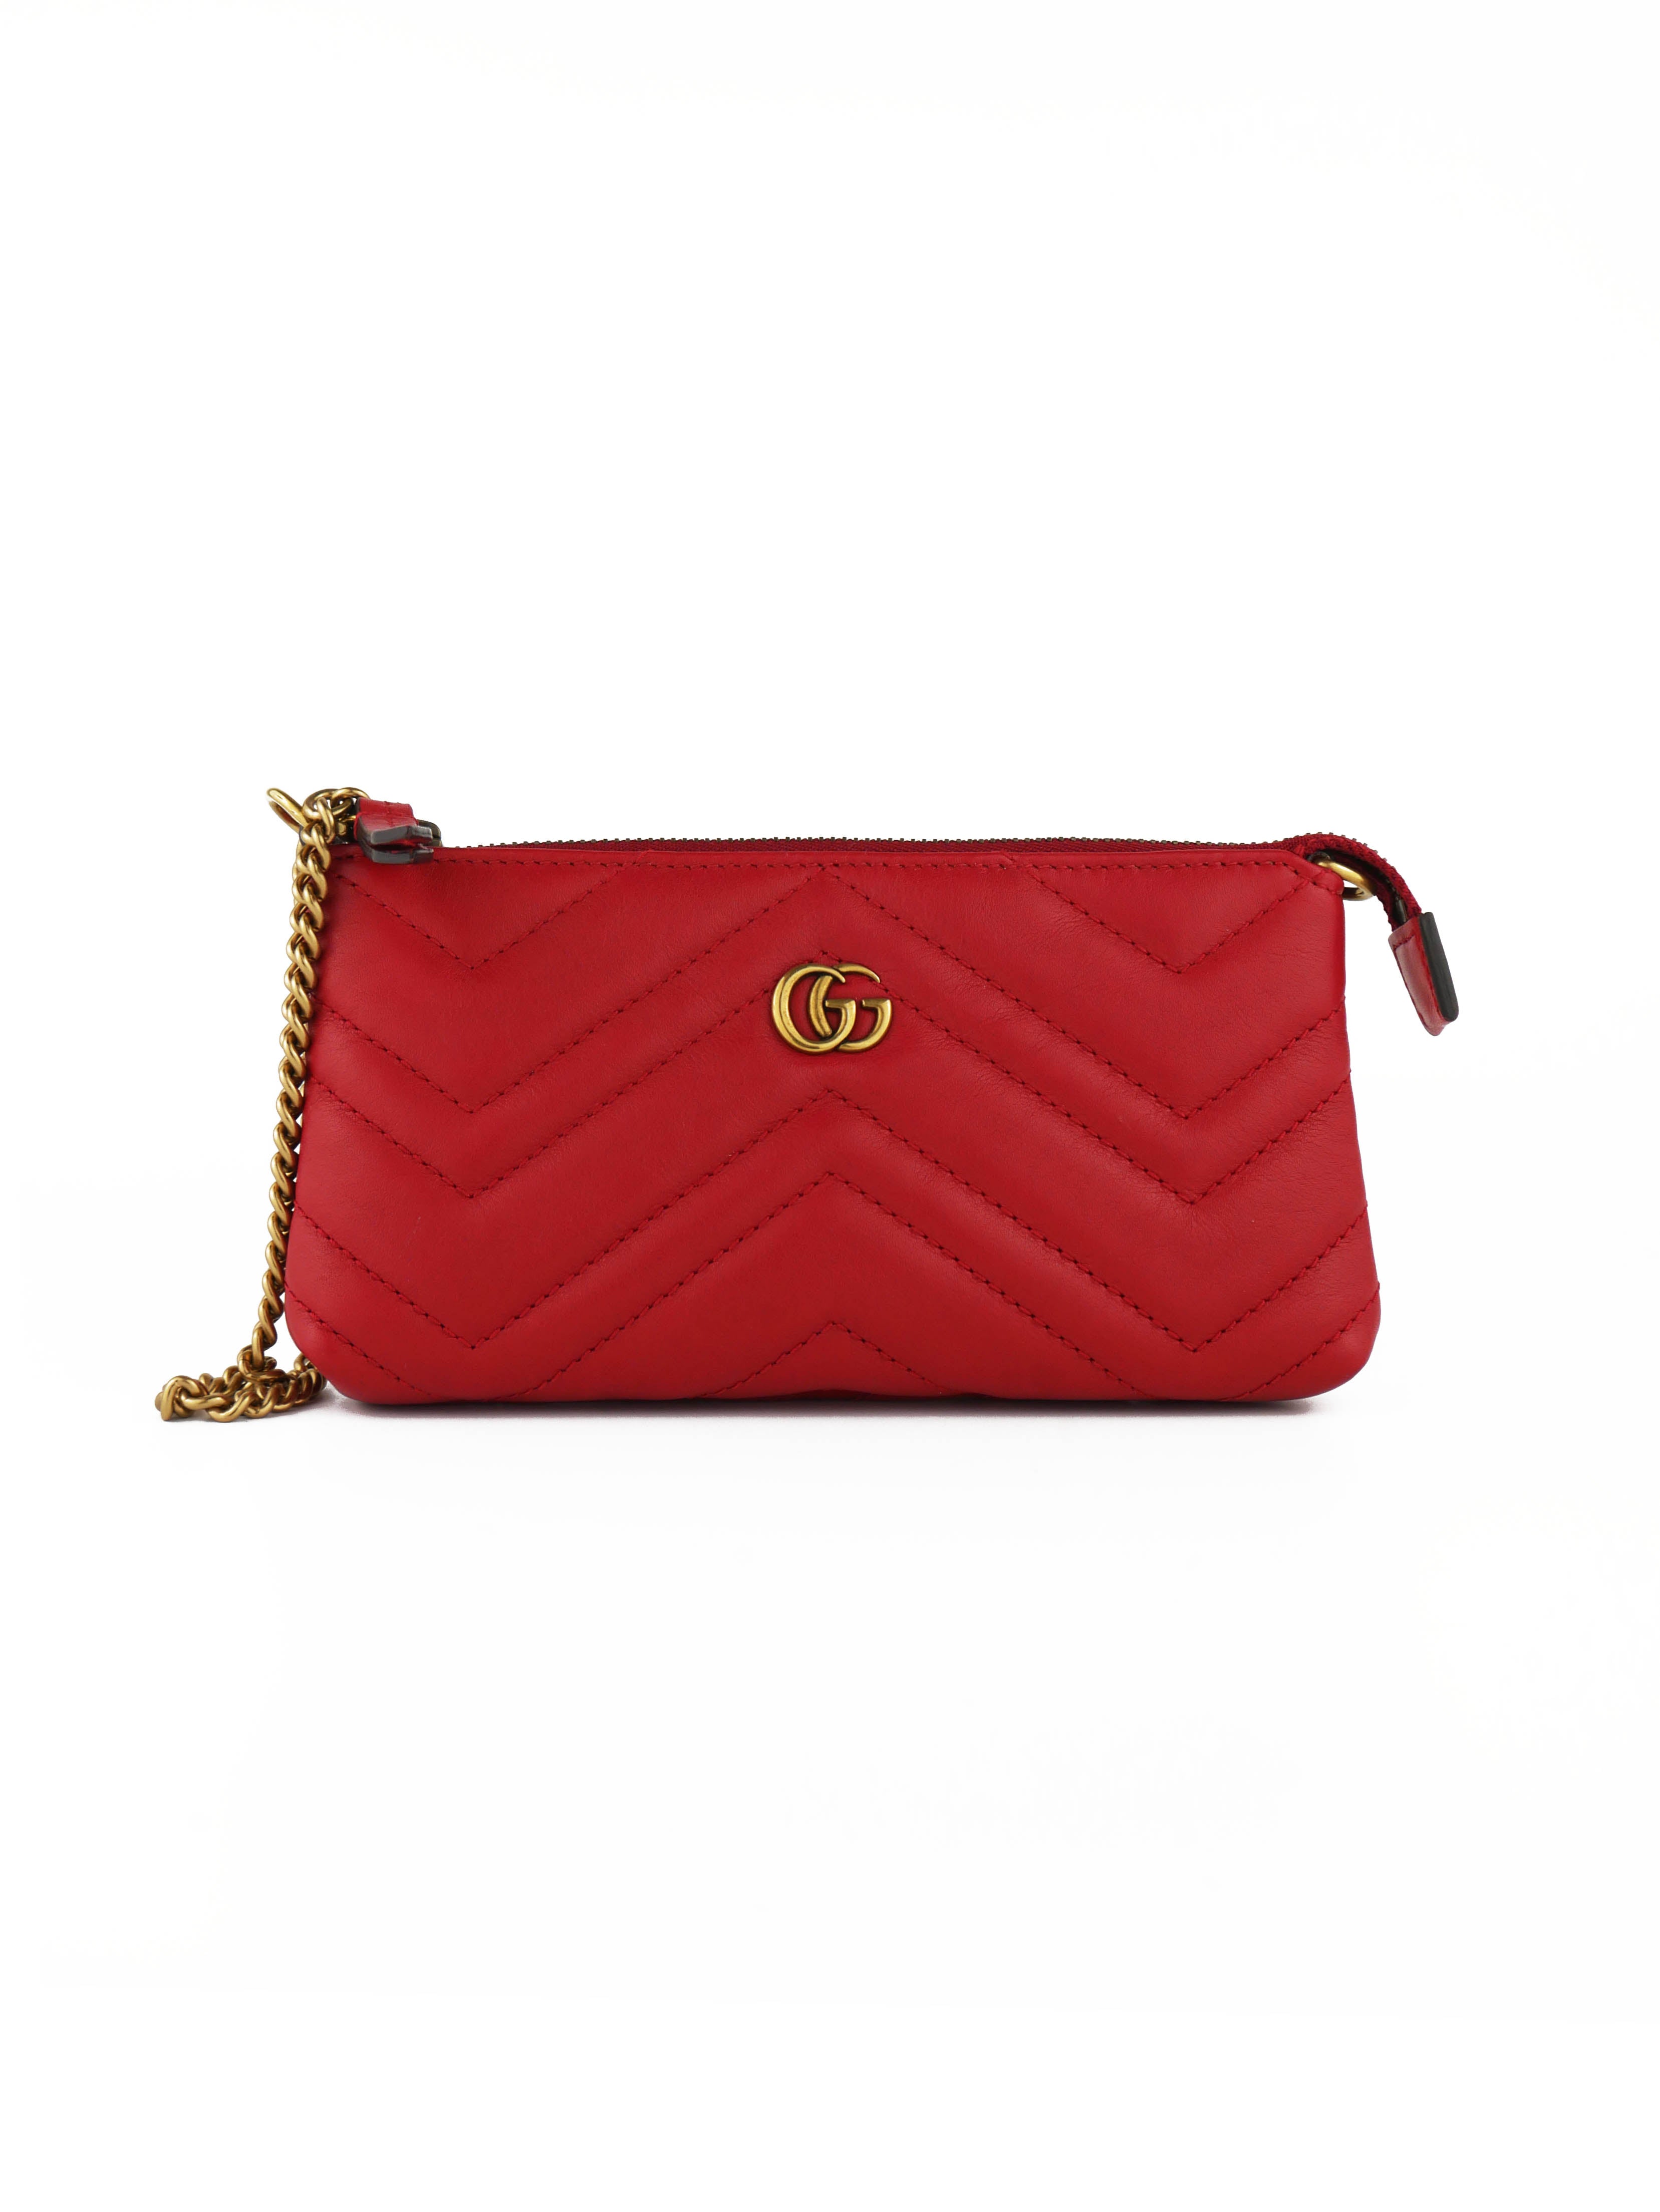 gucci-red-quilted-wallet-on-chain-1.jpg